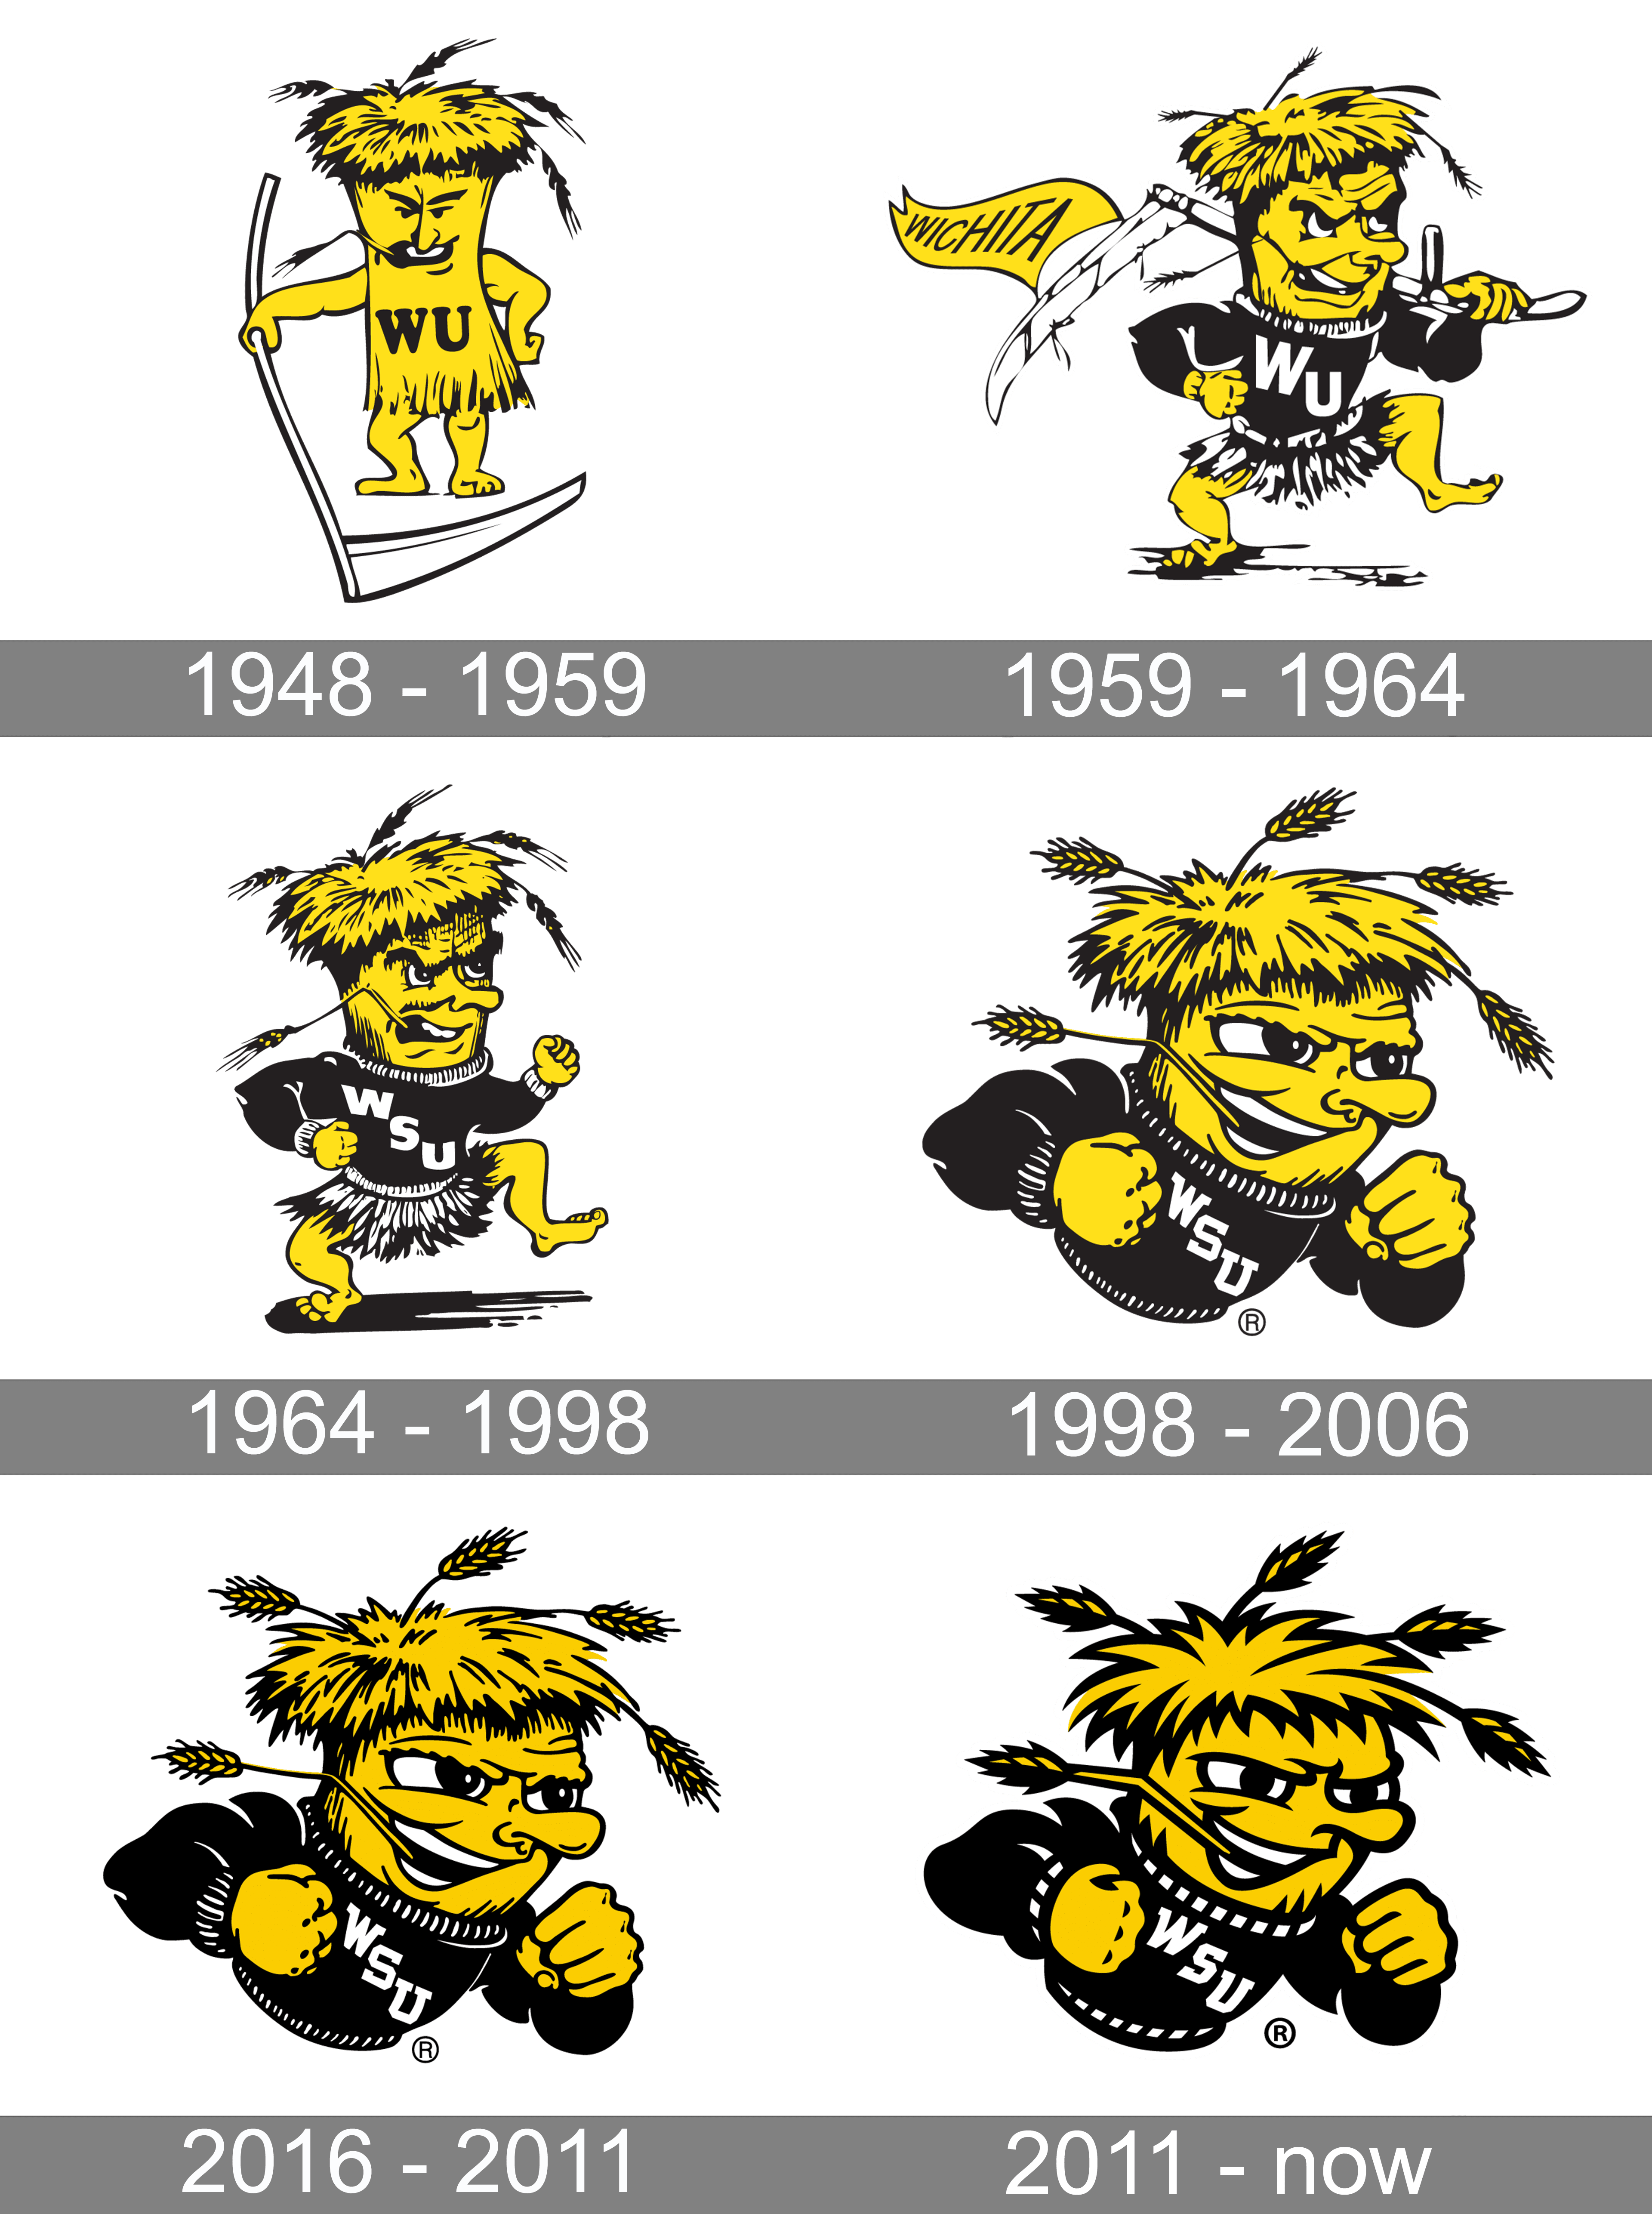 What the heck is a Shocker, and why is it Wichita State's mascot? 